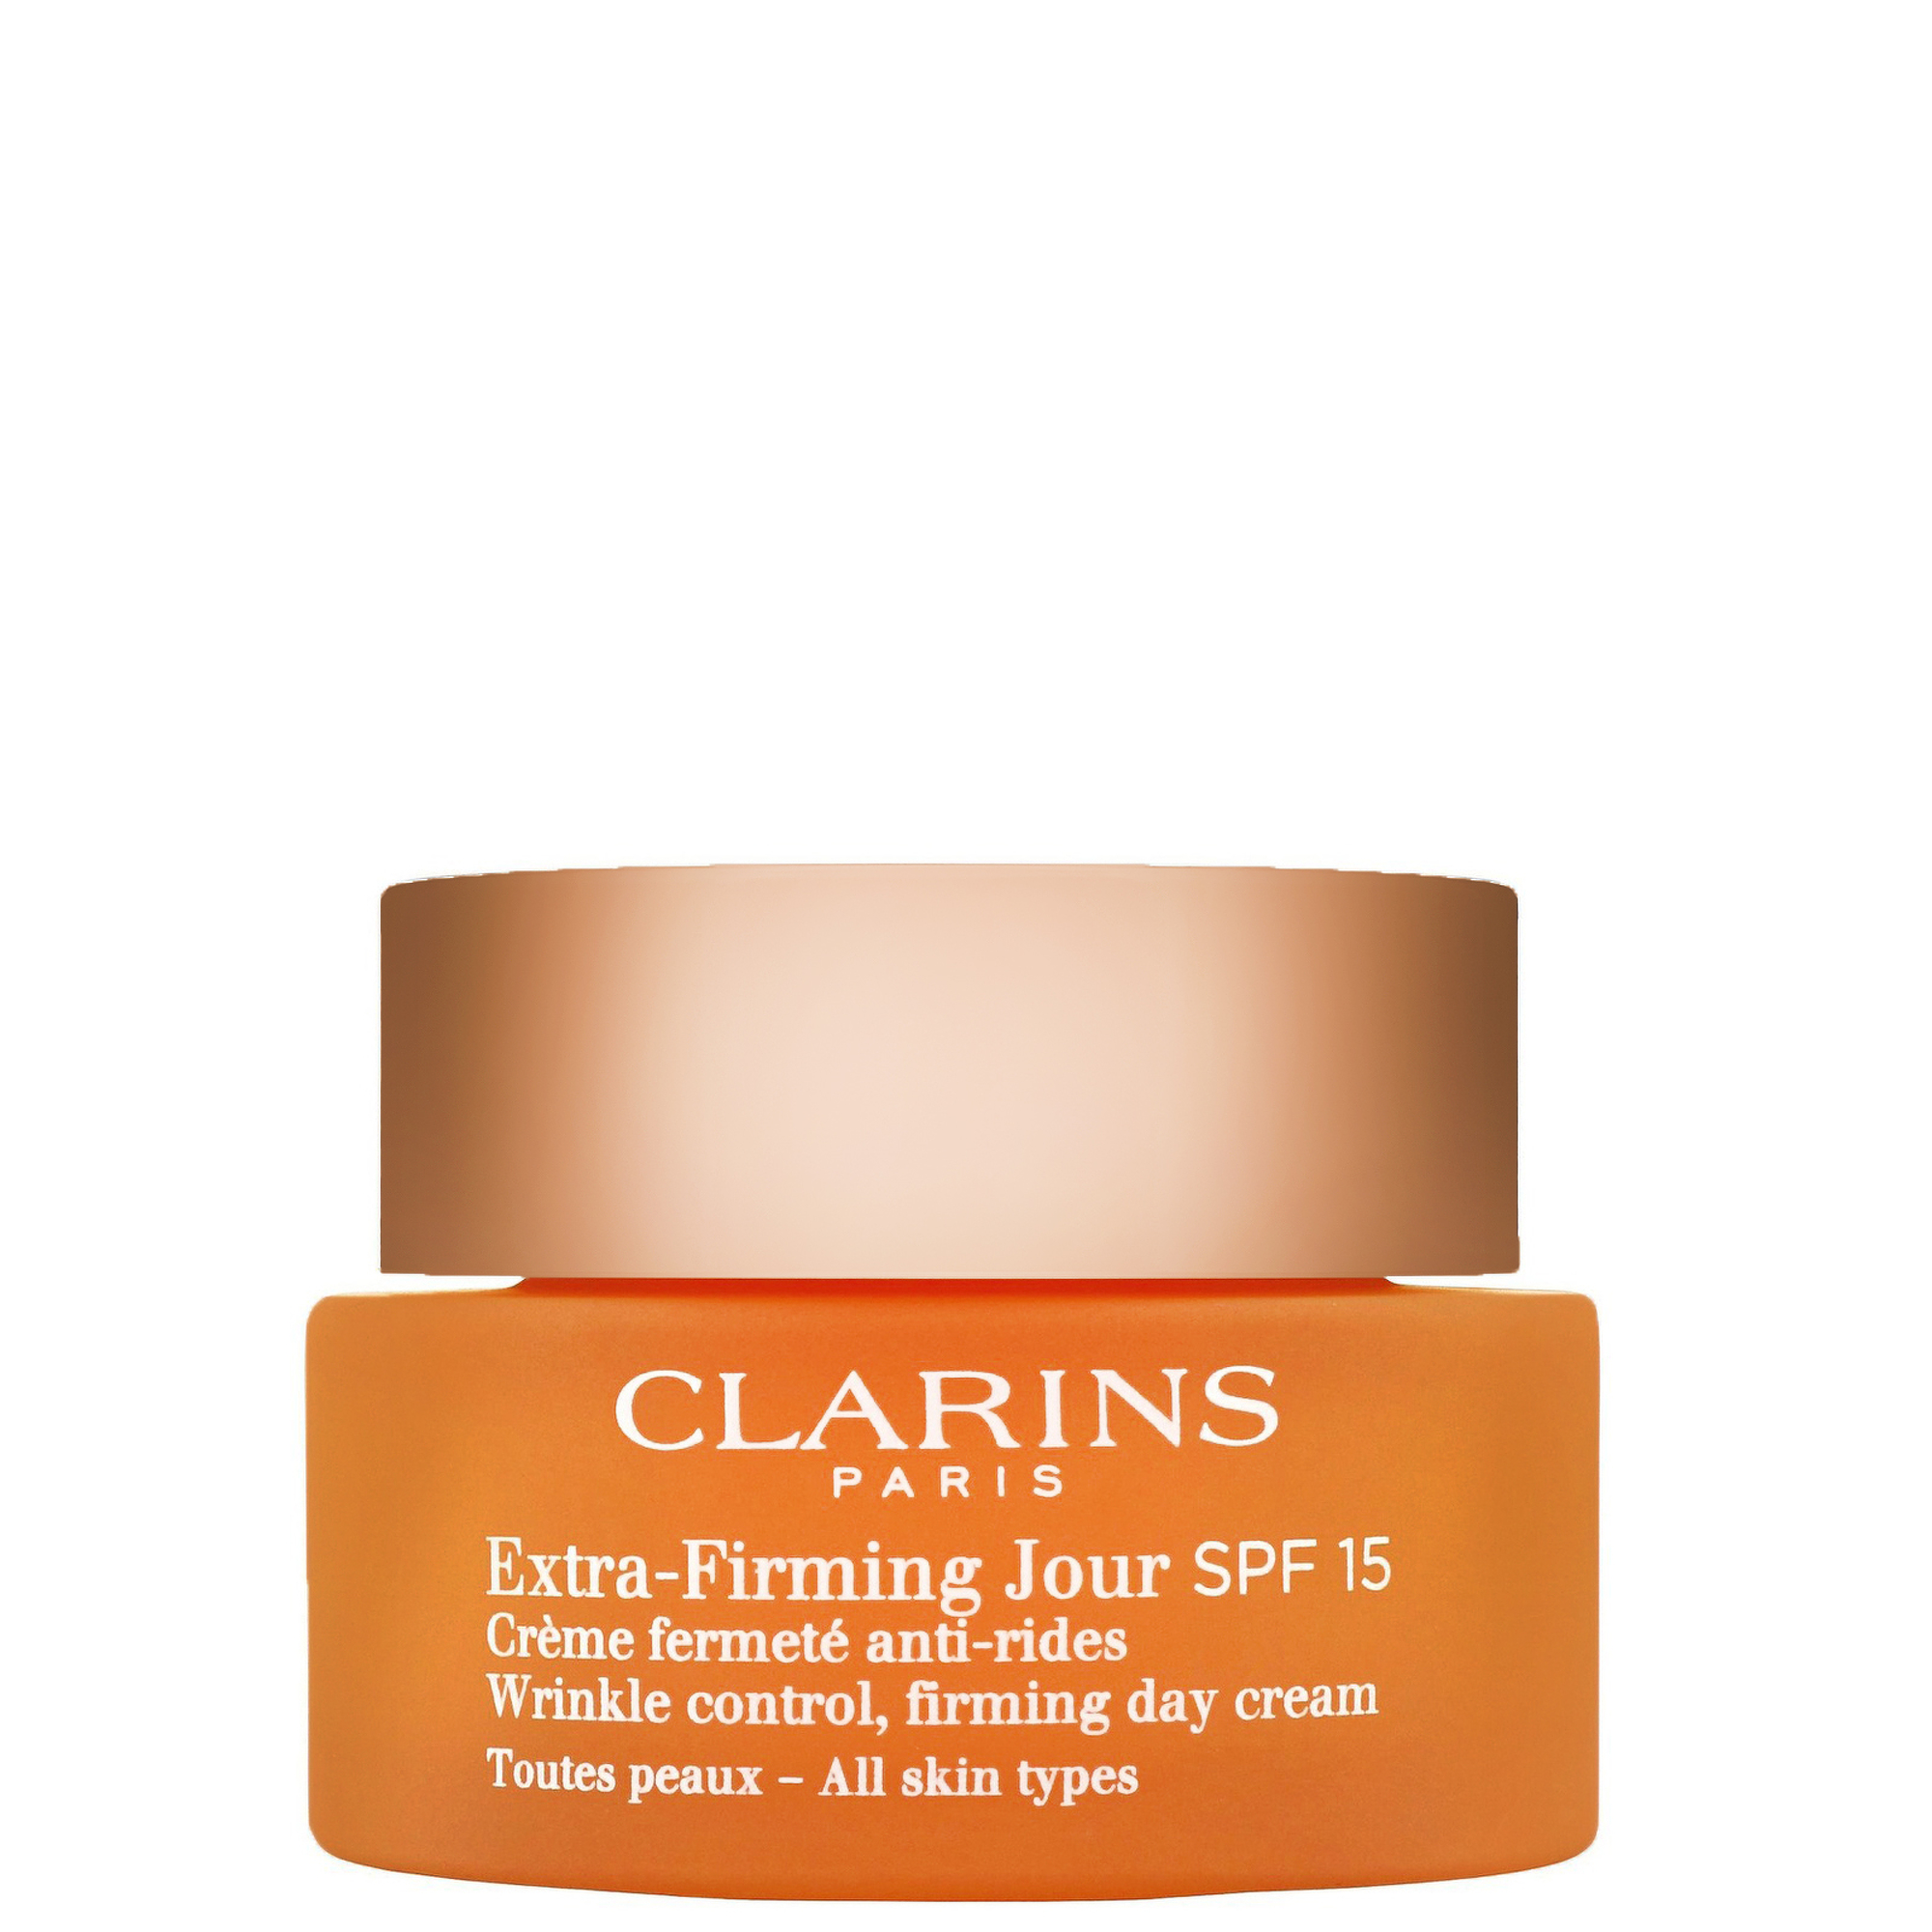 Image of Clarins Extra-Firming Day Cream SPF15 for All Skin Types 50ml / 1.7 oz.